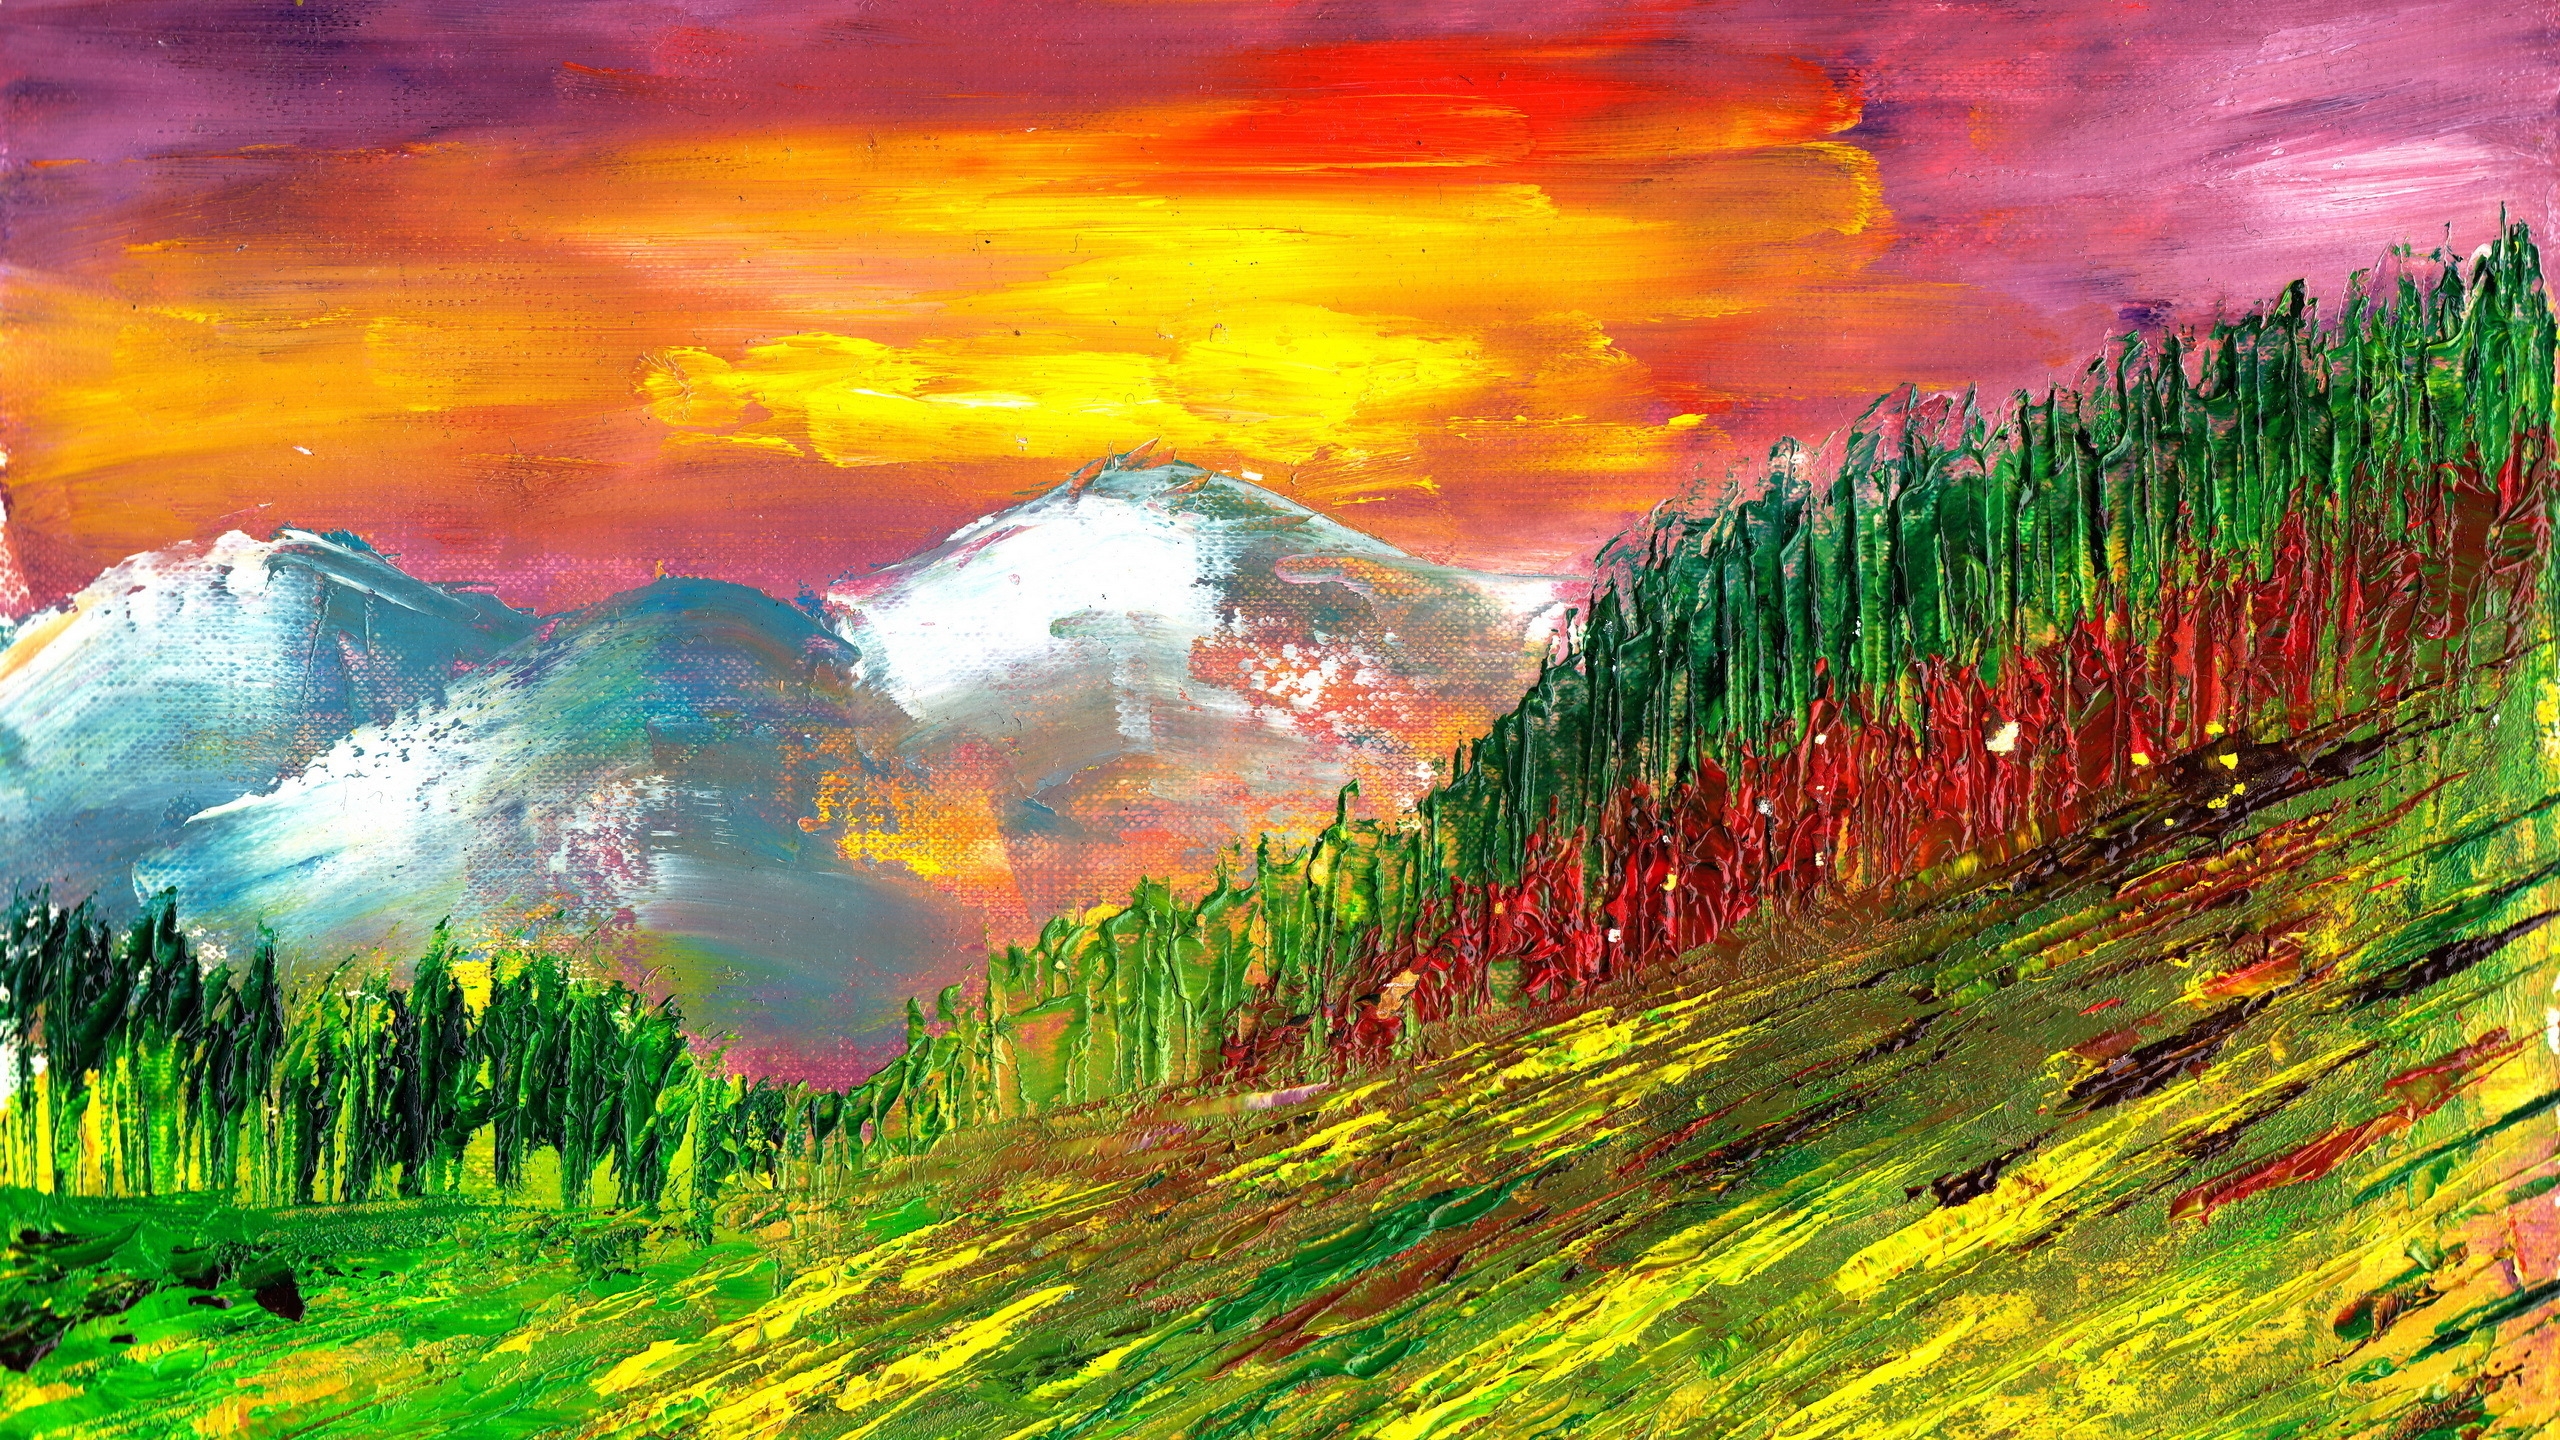 Beautiful Oil Painting for 2560x1440 HDTV resolution